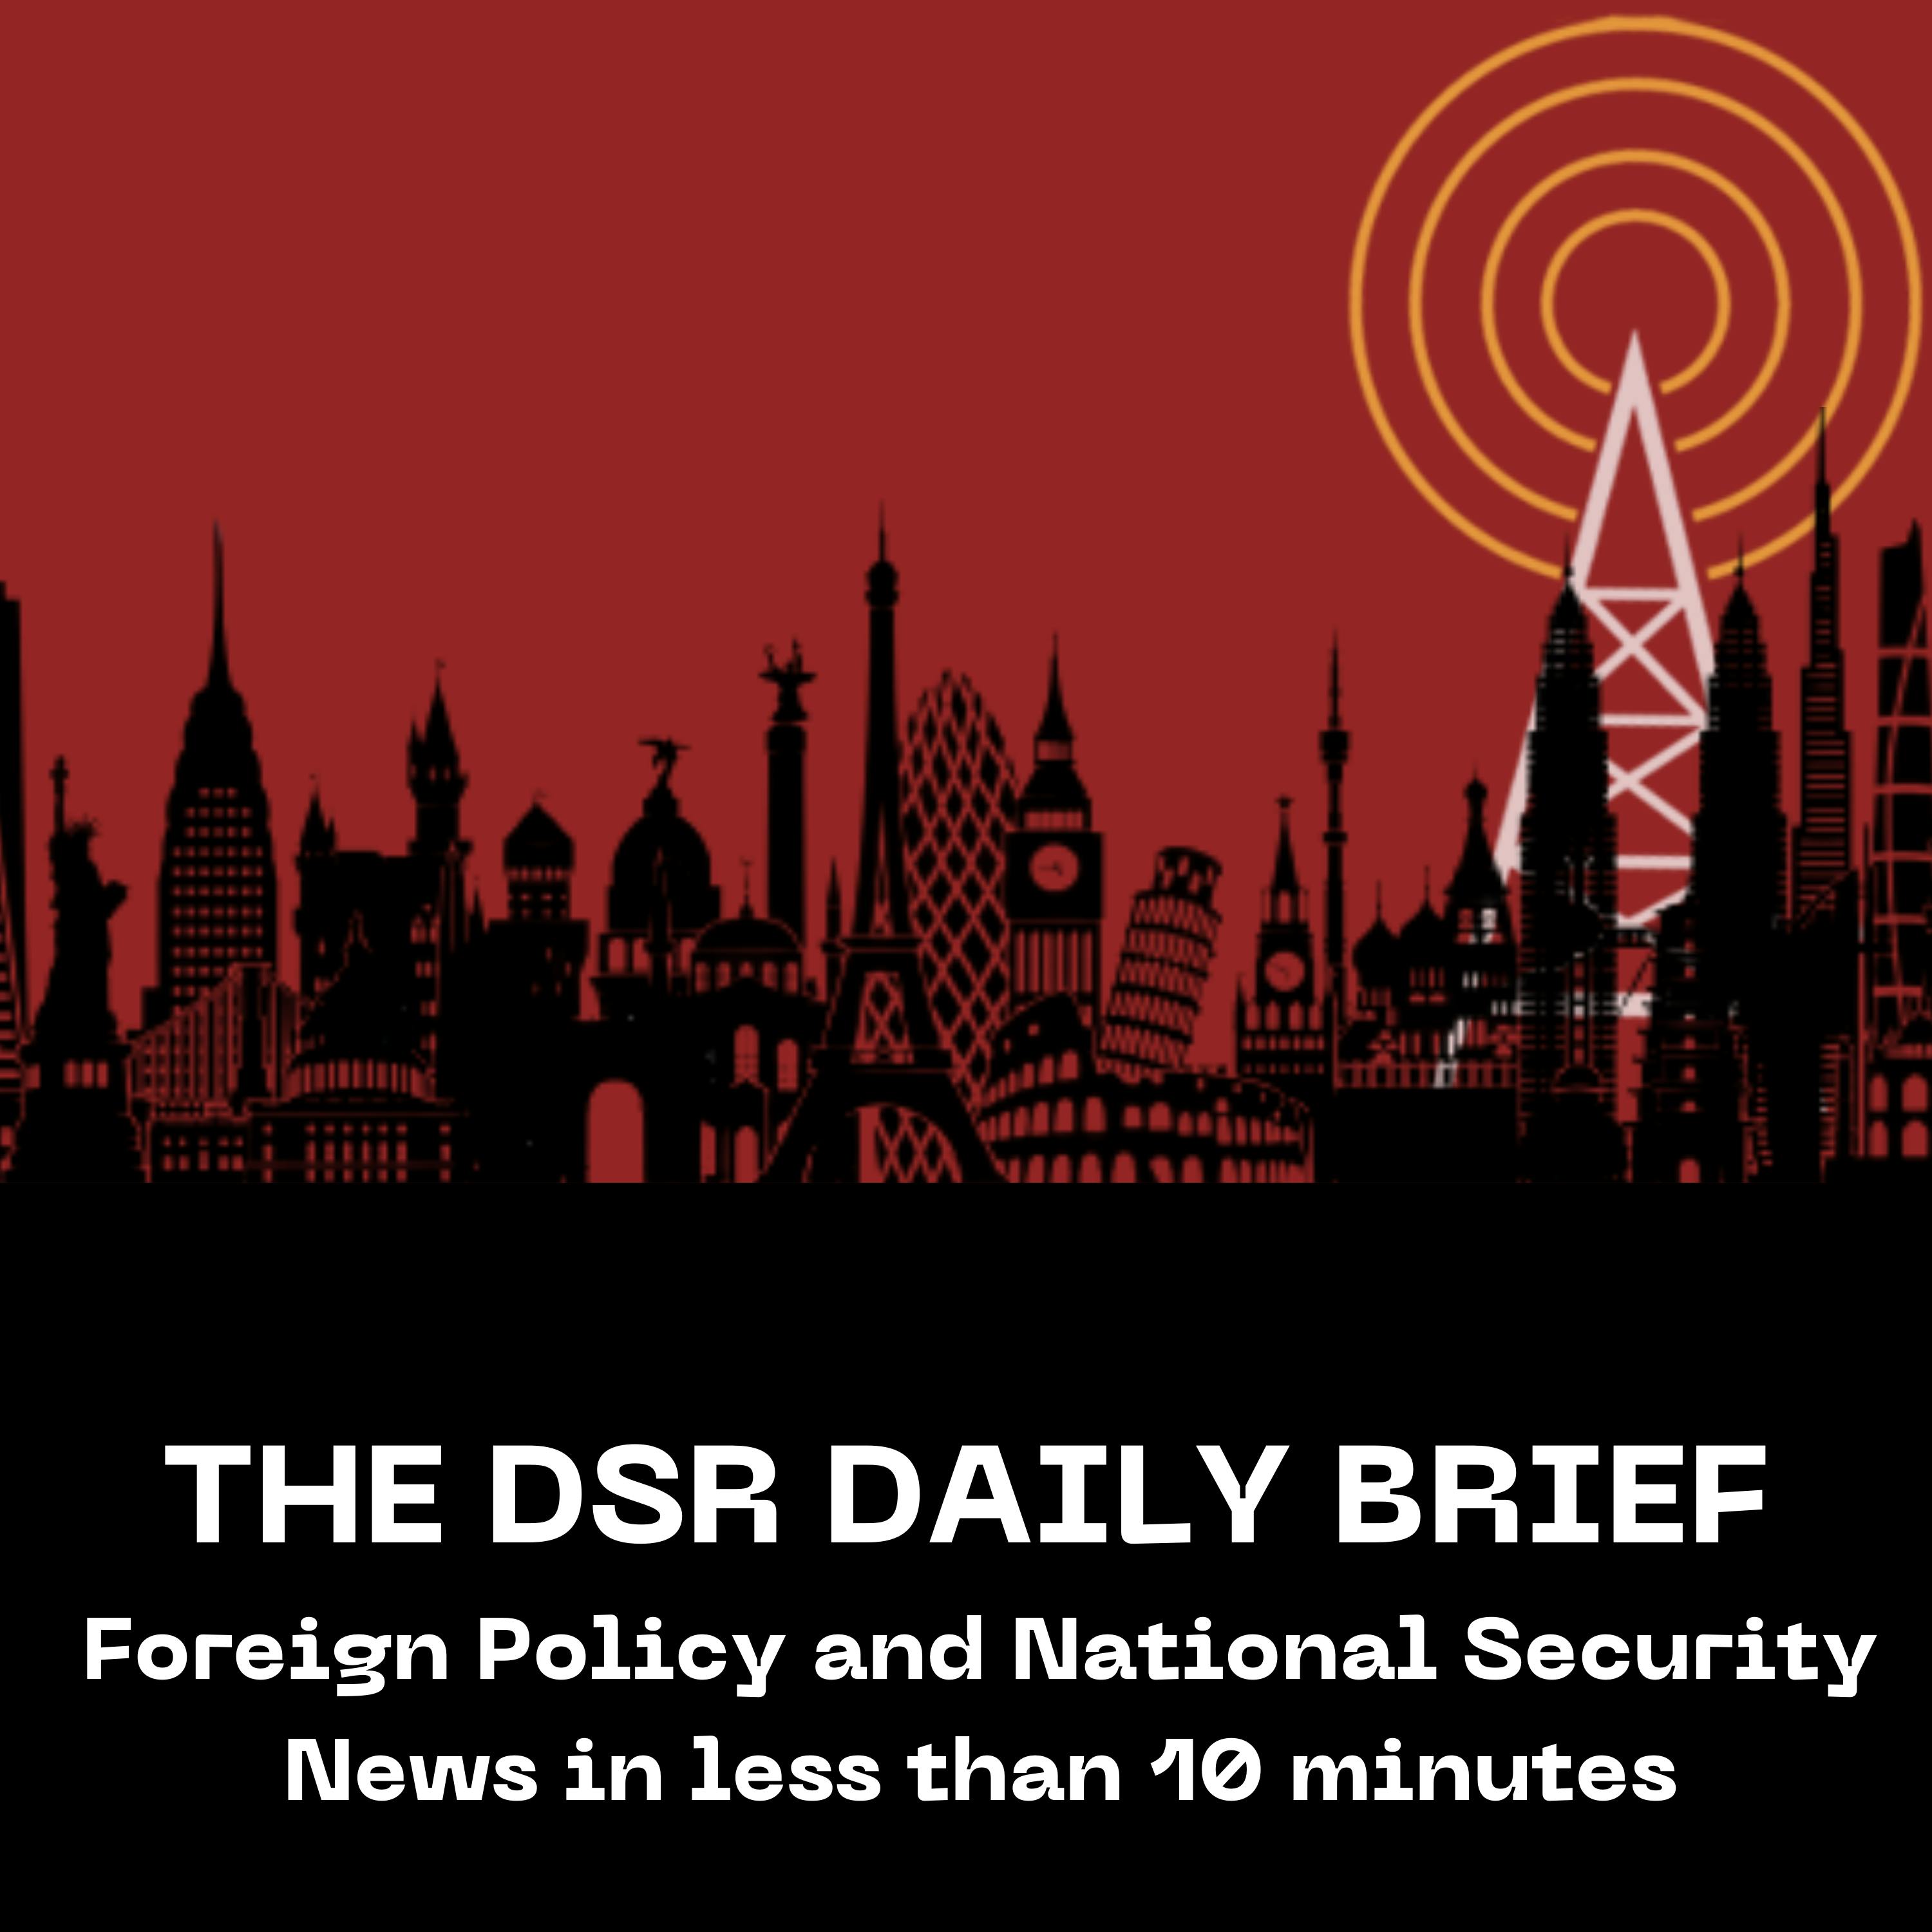 The DSR Daily for March 22: US Draft Resolution Calls for Immediate Ceasefire, DOJ Sues Apple